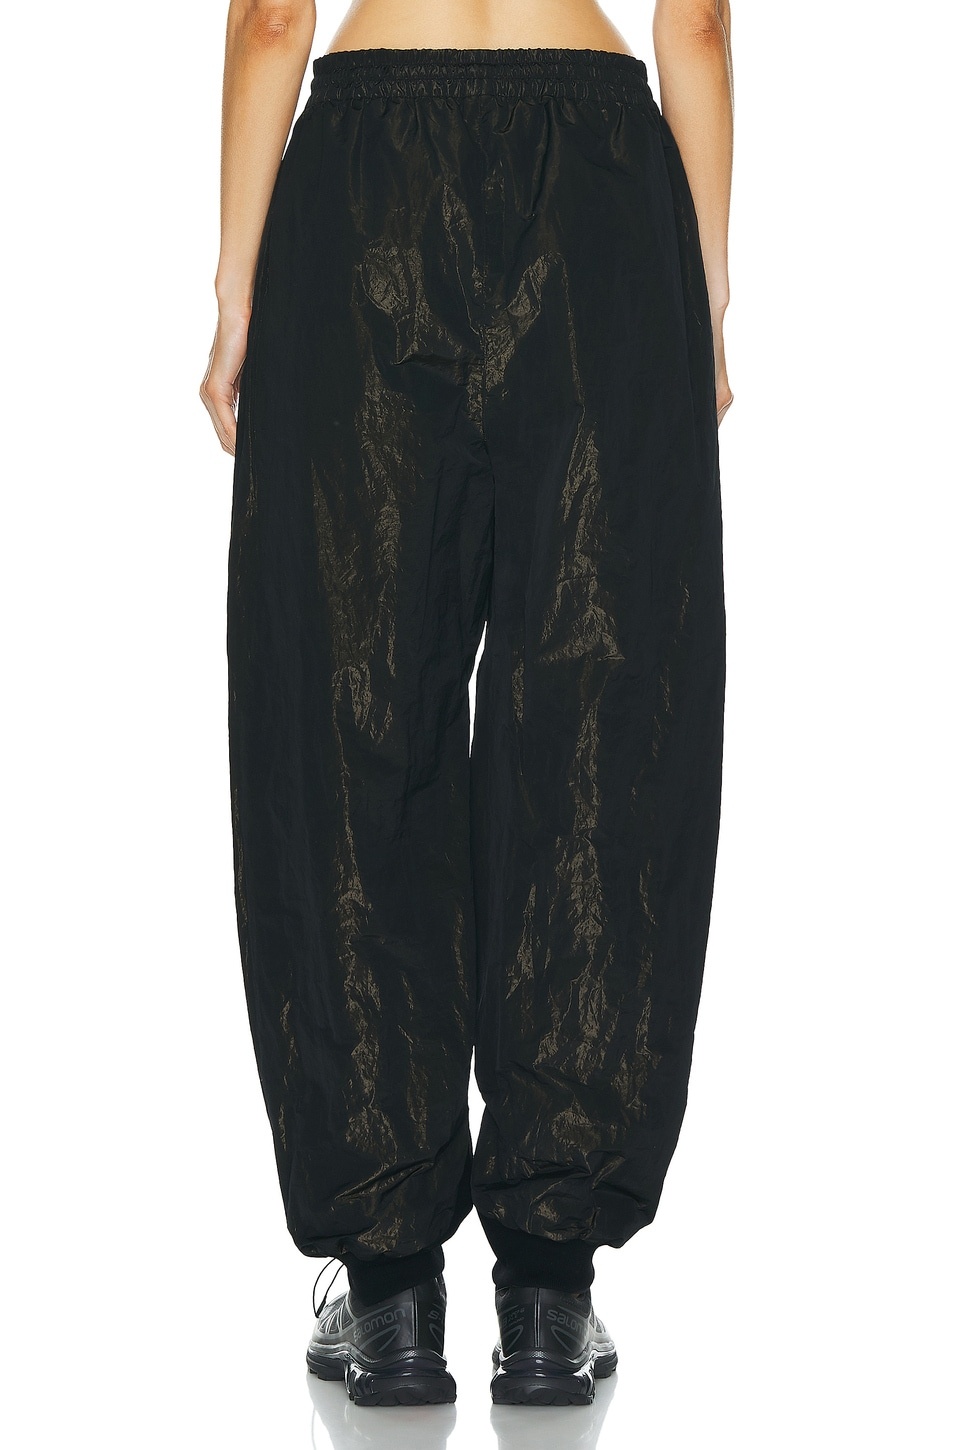 Wrinkled Polyester Pintuck Sweatpant - 4